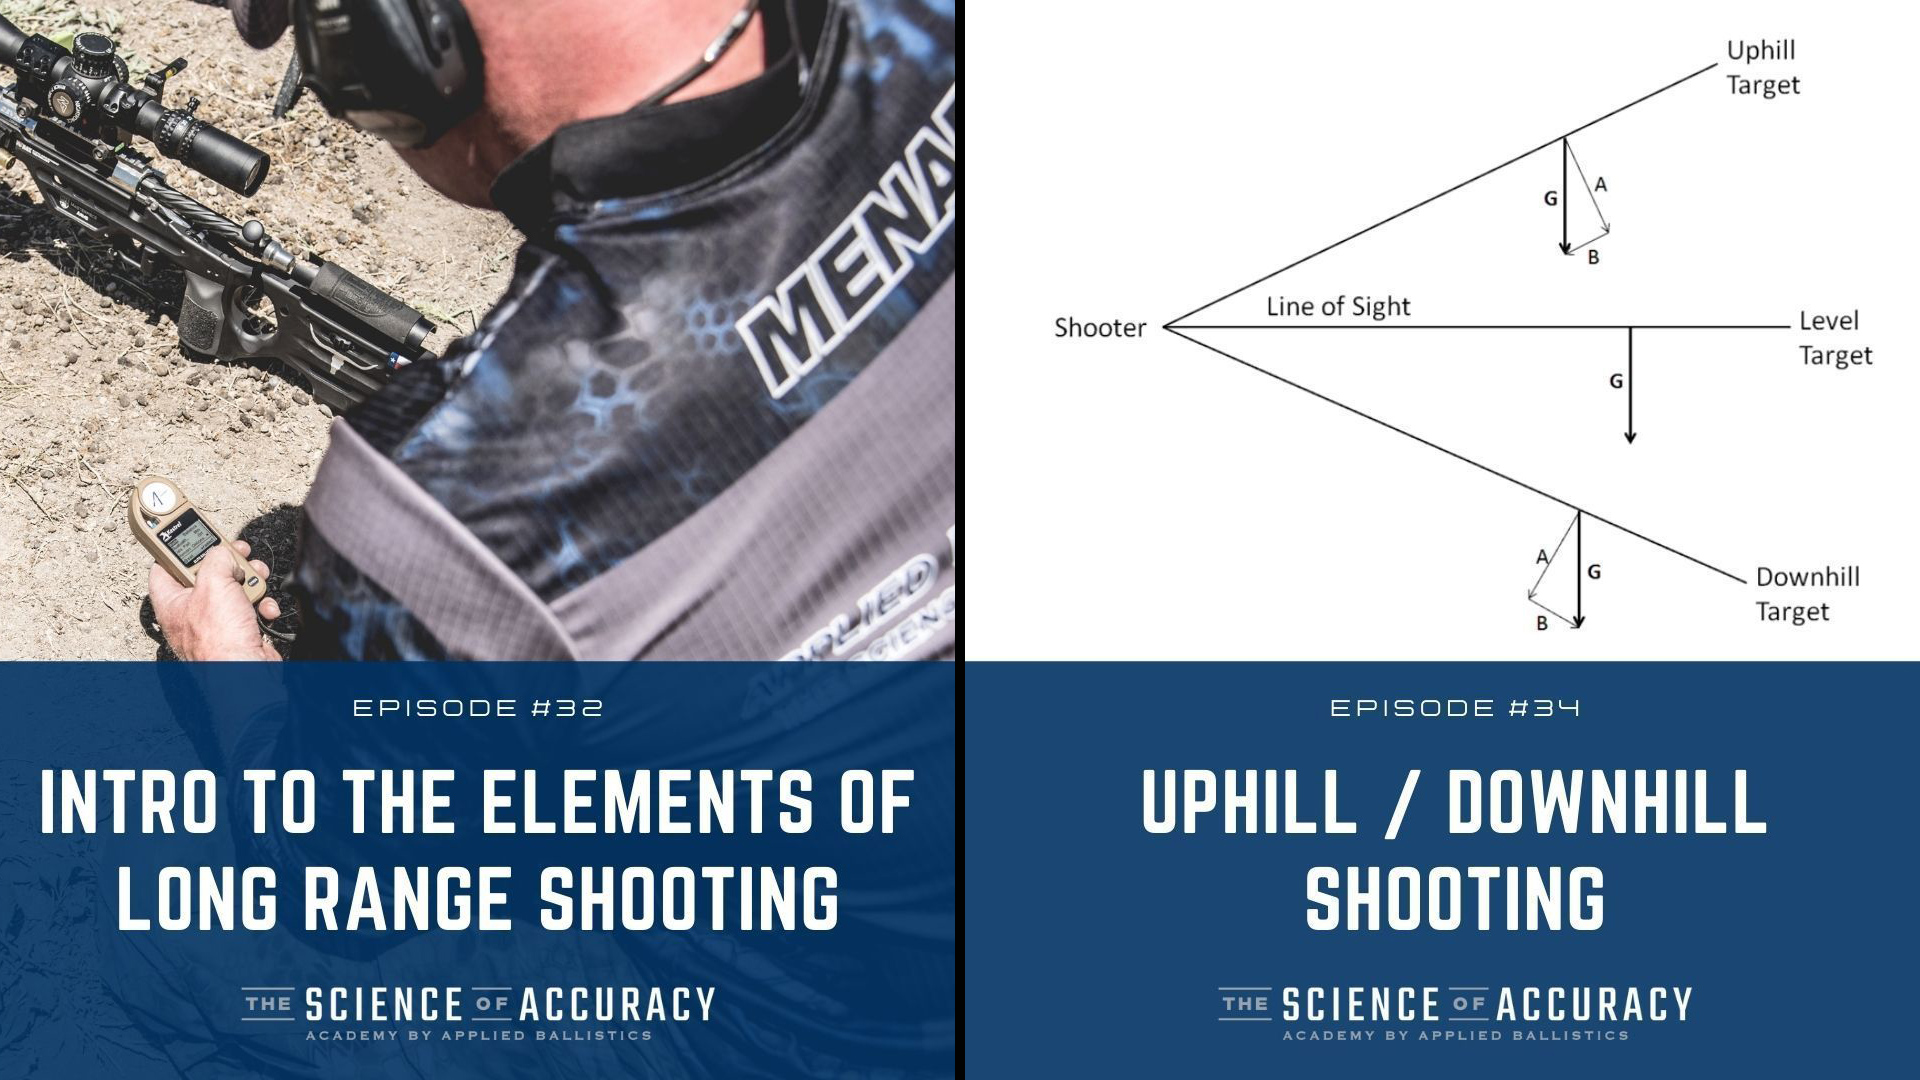 Science of Accuracy Academy